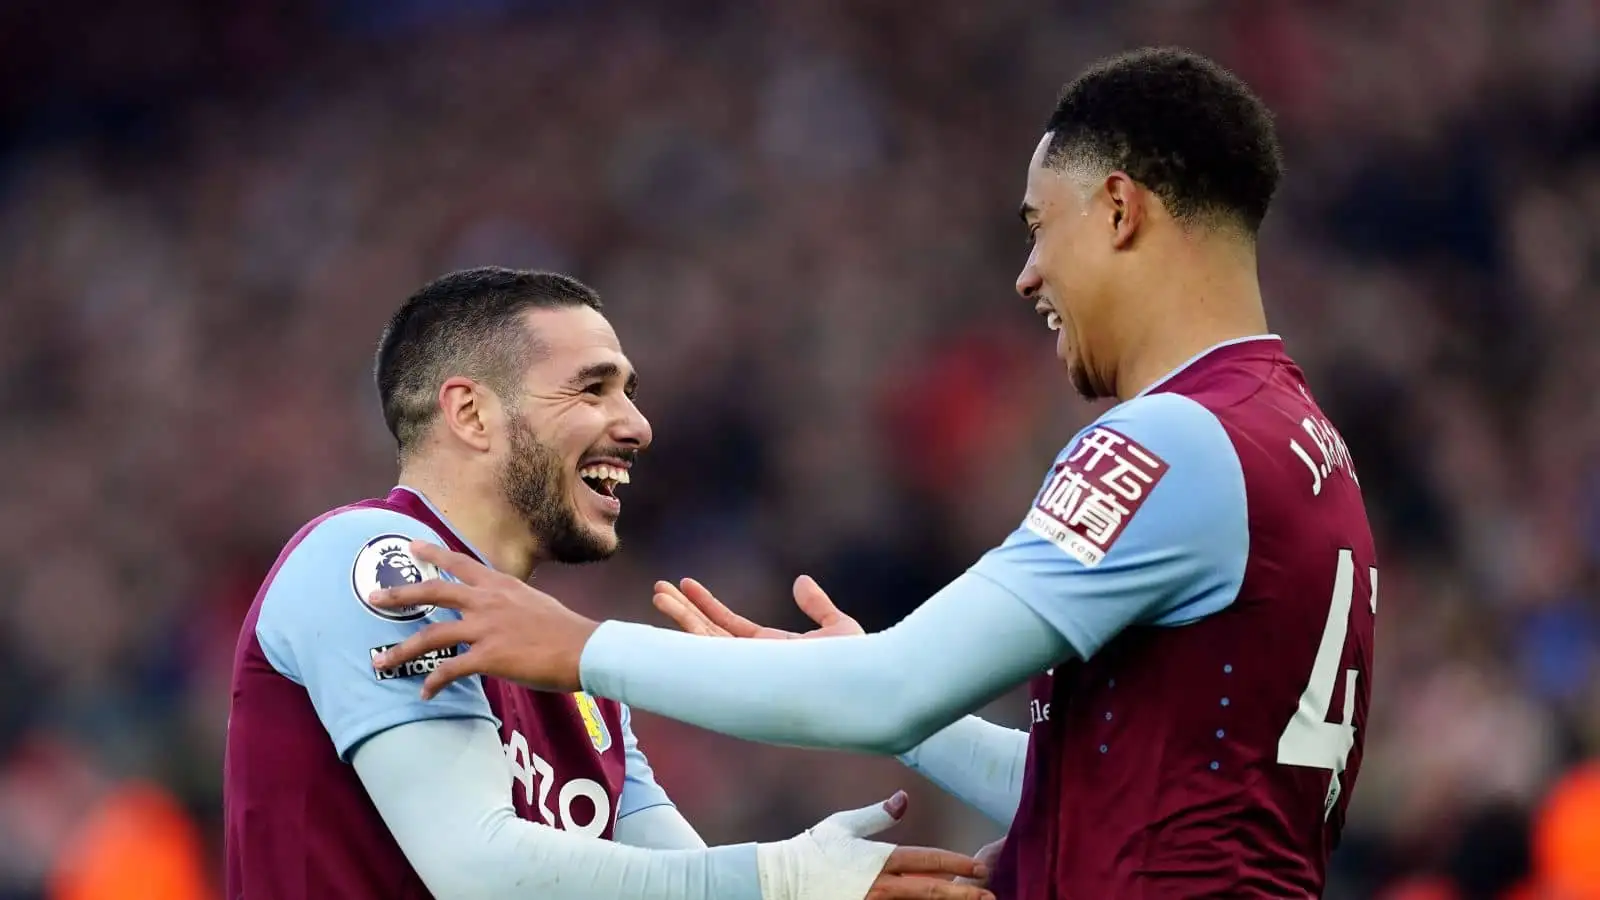 Aston Villa's Emiliano Buendia celebrates scoring their side's third goal of the game with team-mate Jacob Ramsey during the Premier League match at Villa Park, Birmingham